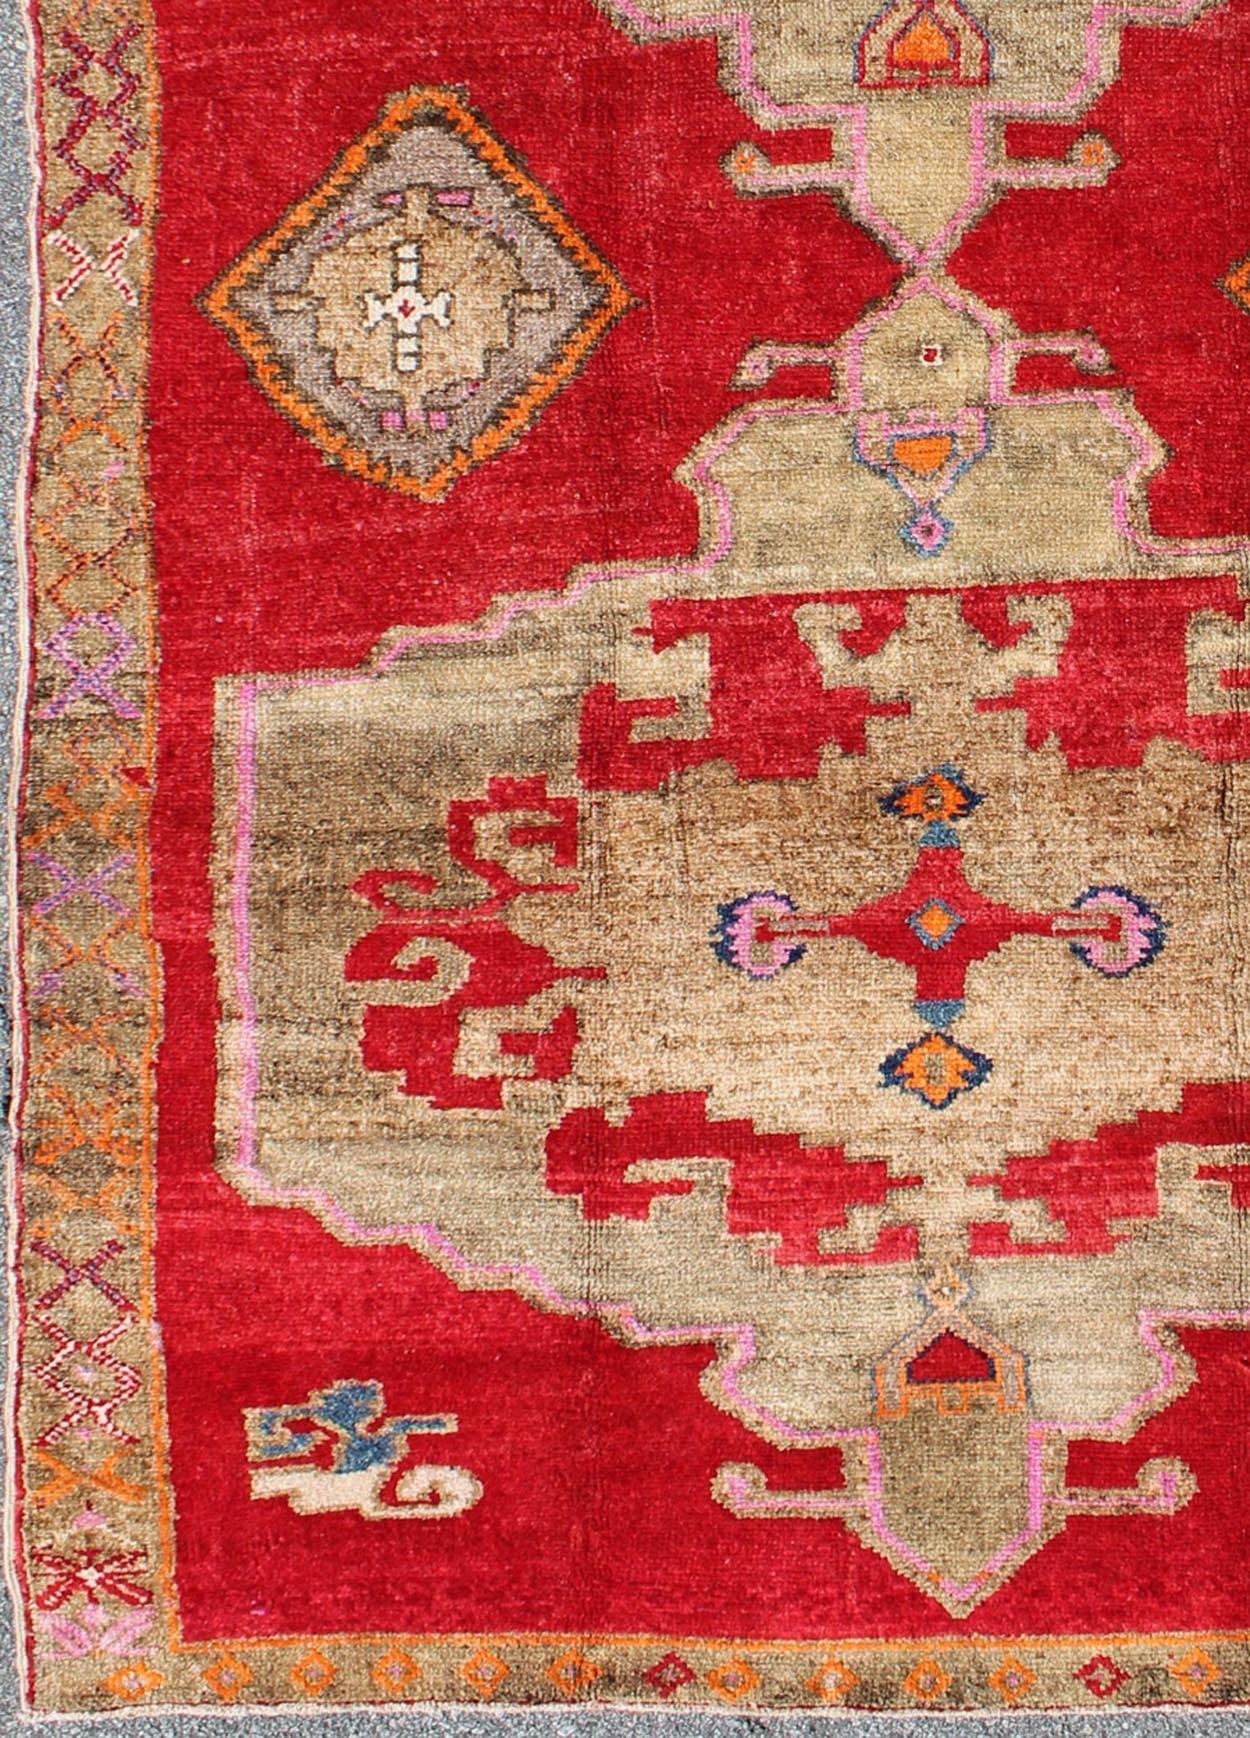 Measures: 5'11'' x 10'4''.
This Turkish rug features a dual central medallion design as well as patterns of smaller Sub-geometric elements in the border. Colors include various shades of red, blue, ivory, taupe and pink. Turkish Oushak are notable